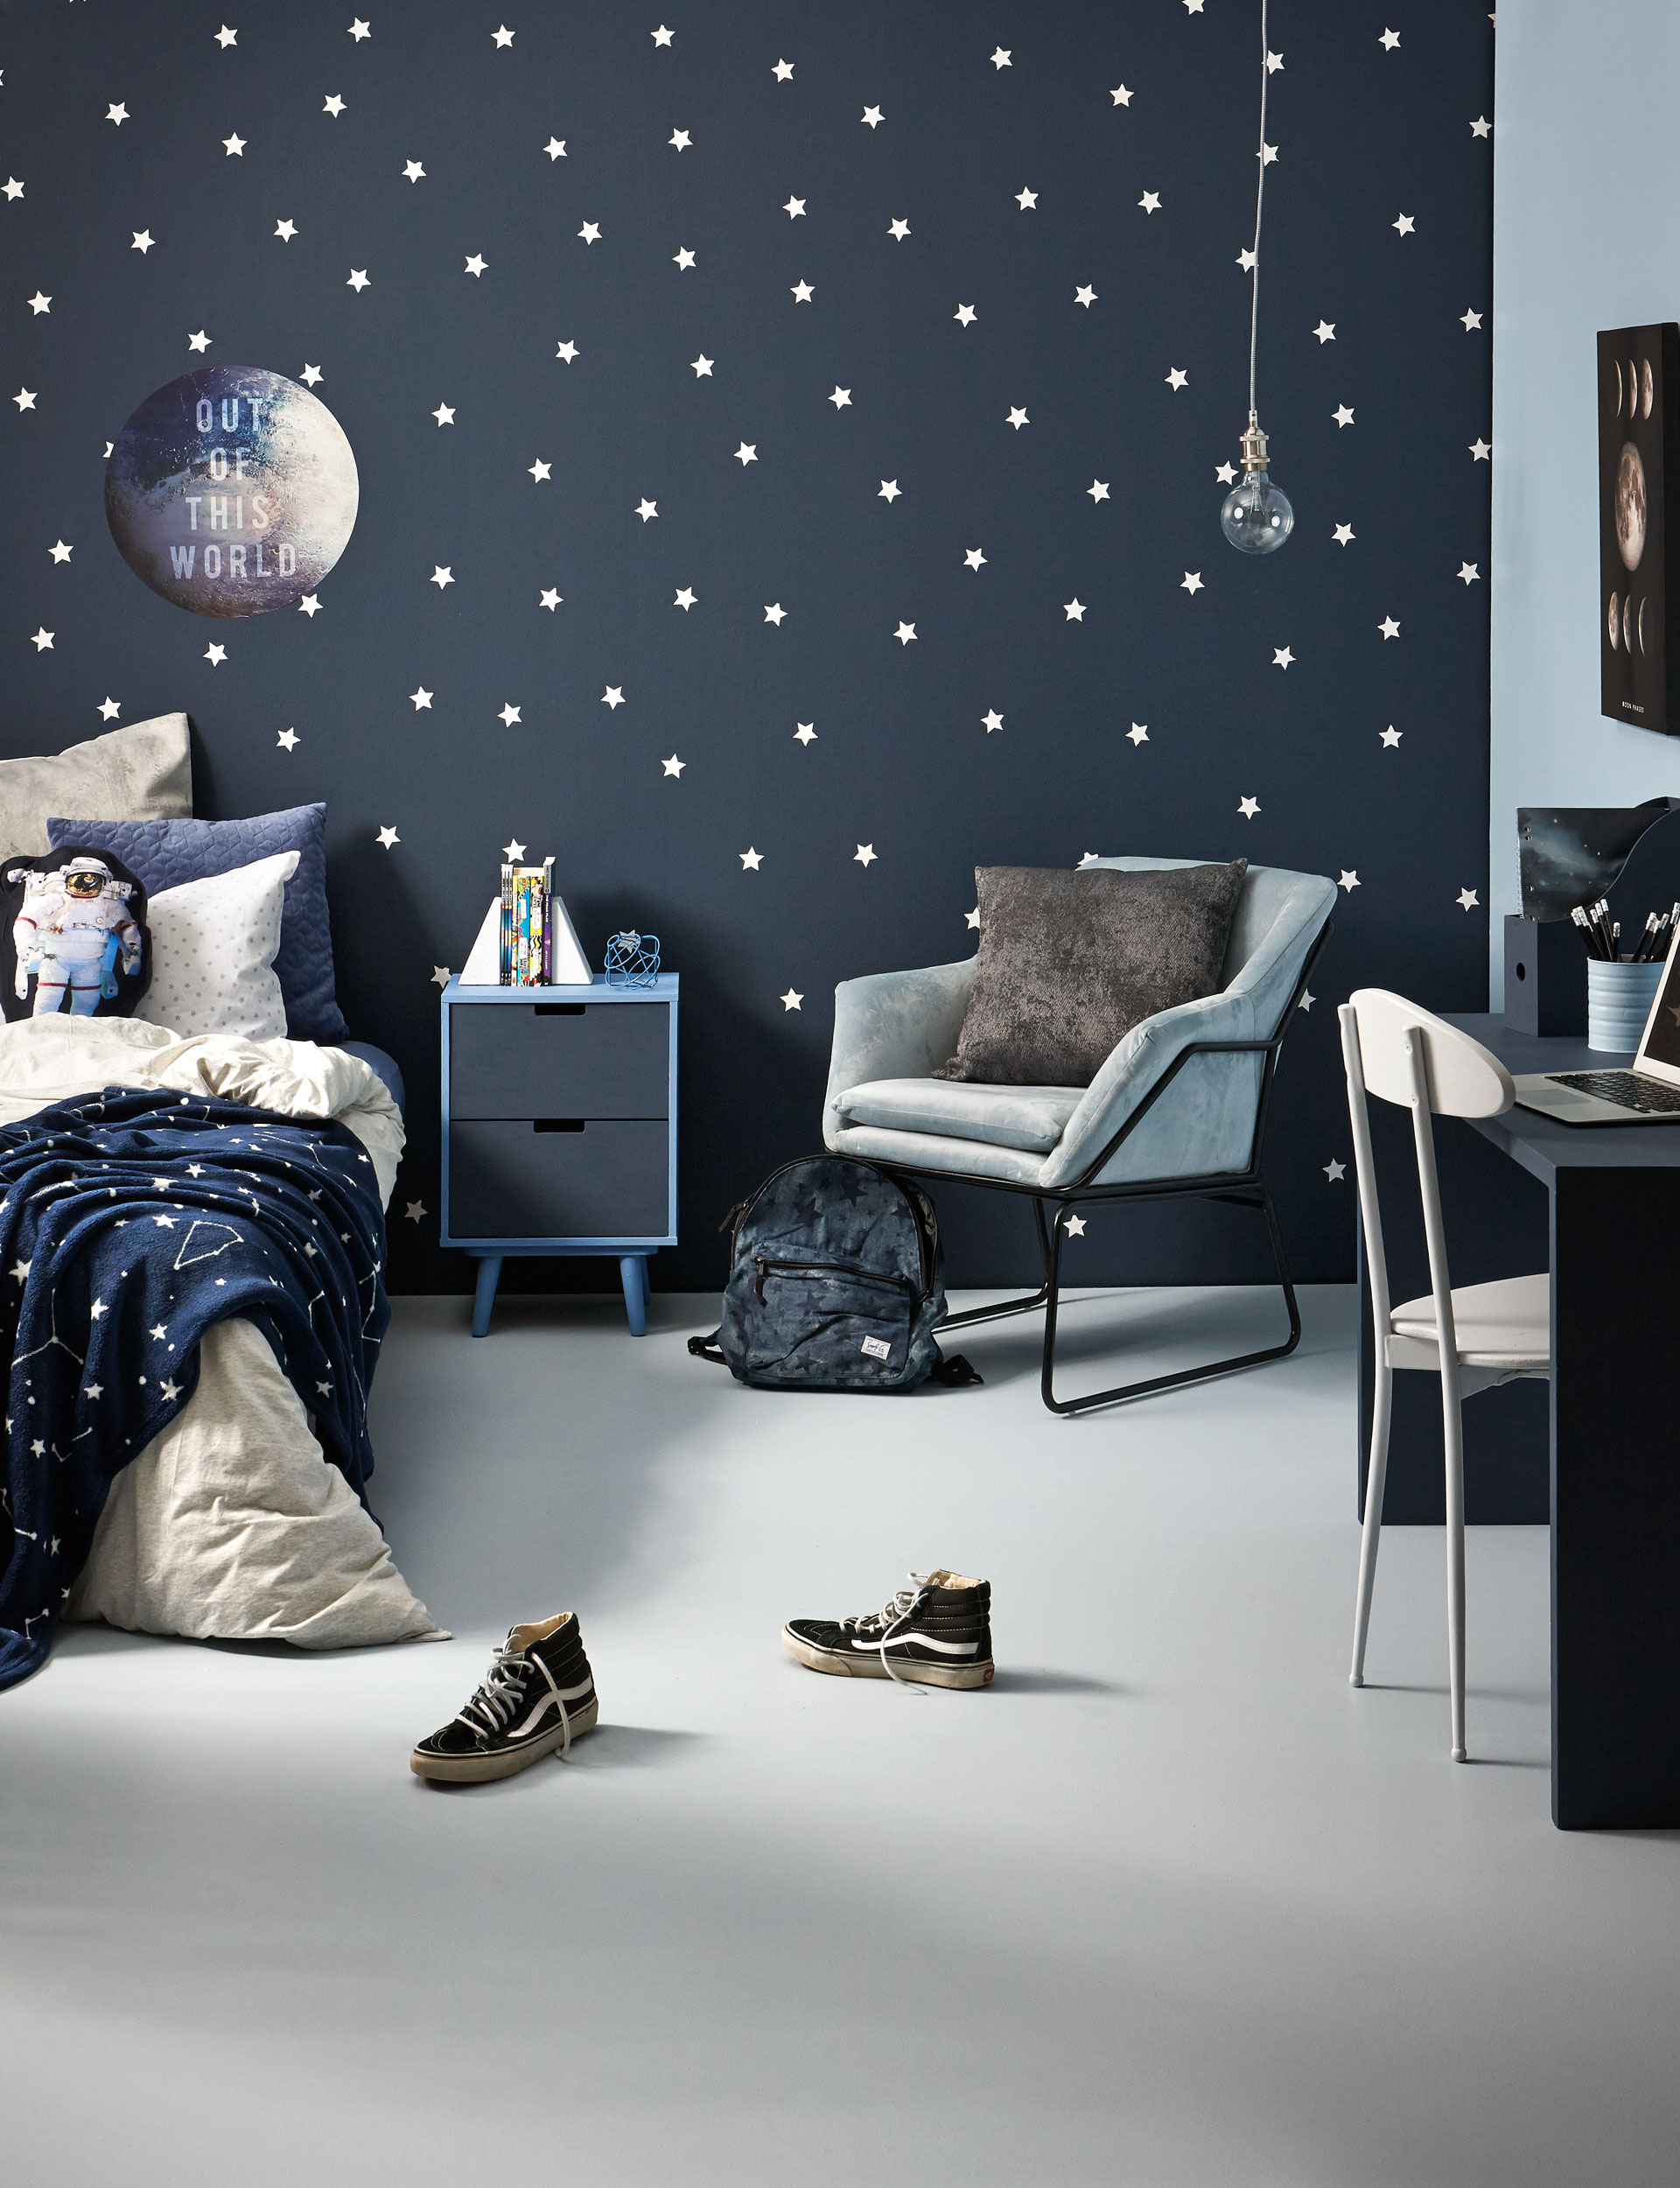 How to design a space-themed kid's room with cool glow-in-the dark paint